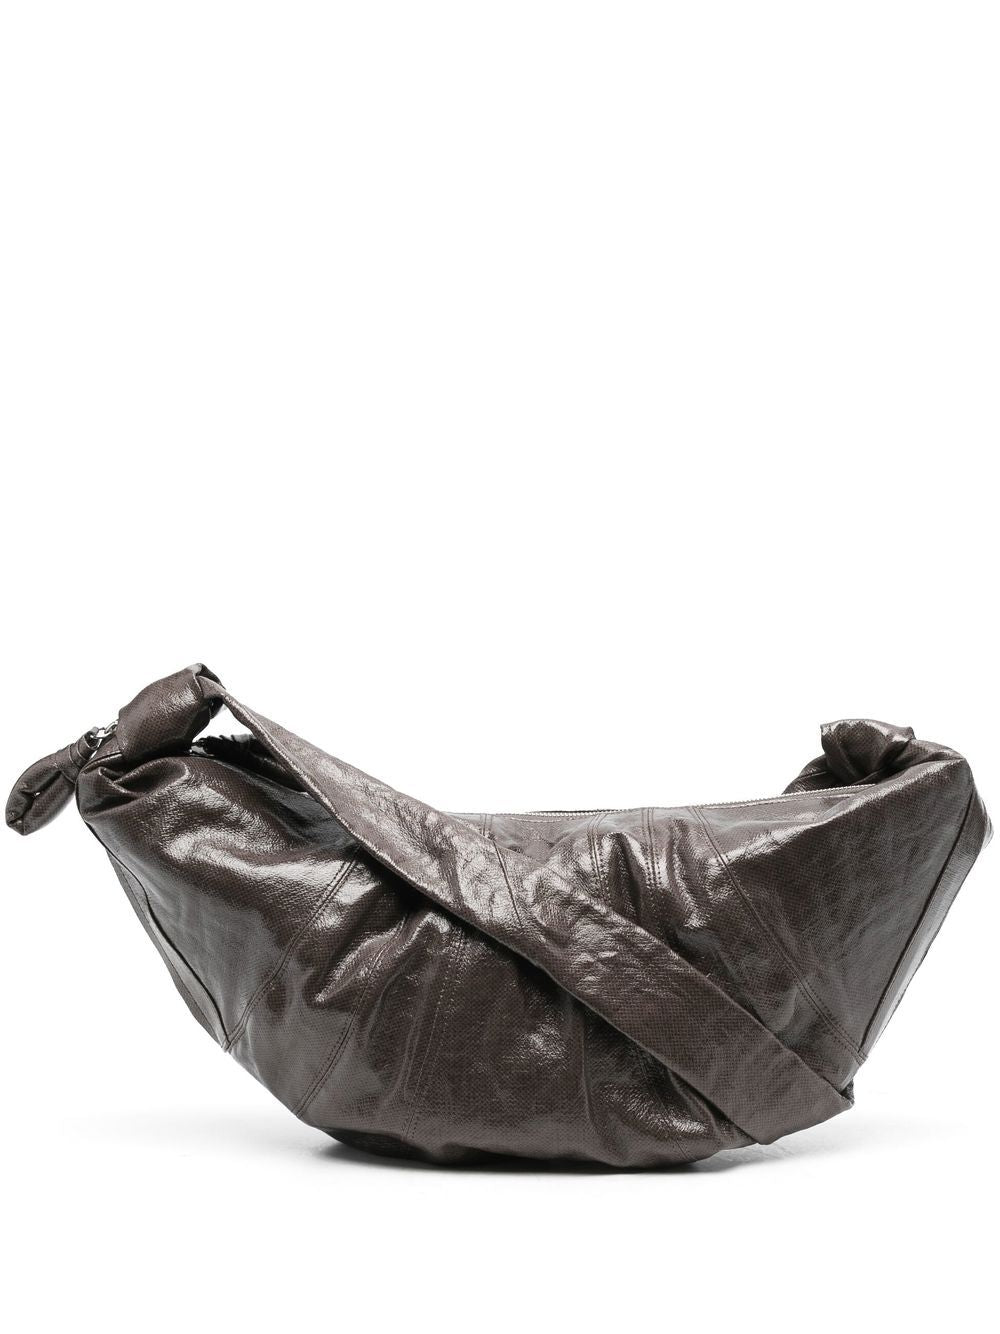 Lemaire Large Croissant Bag — Roasted Pecan